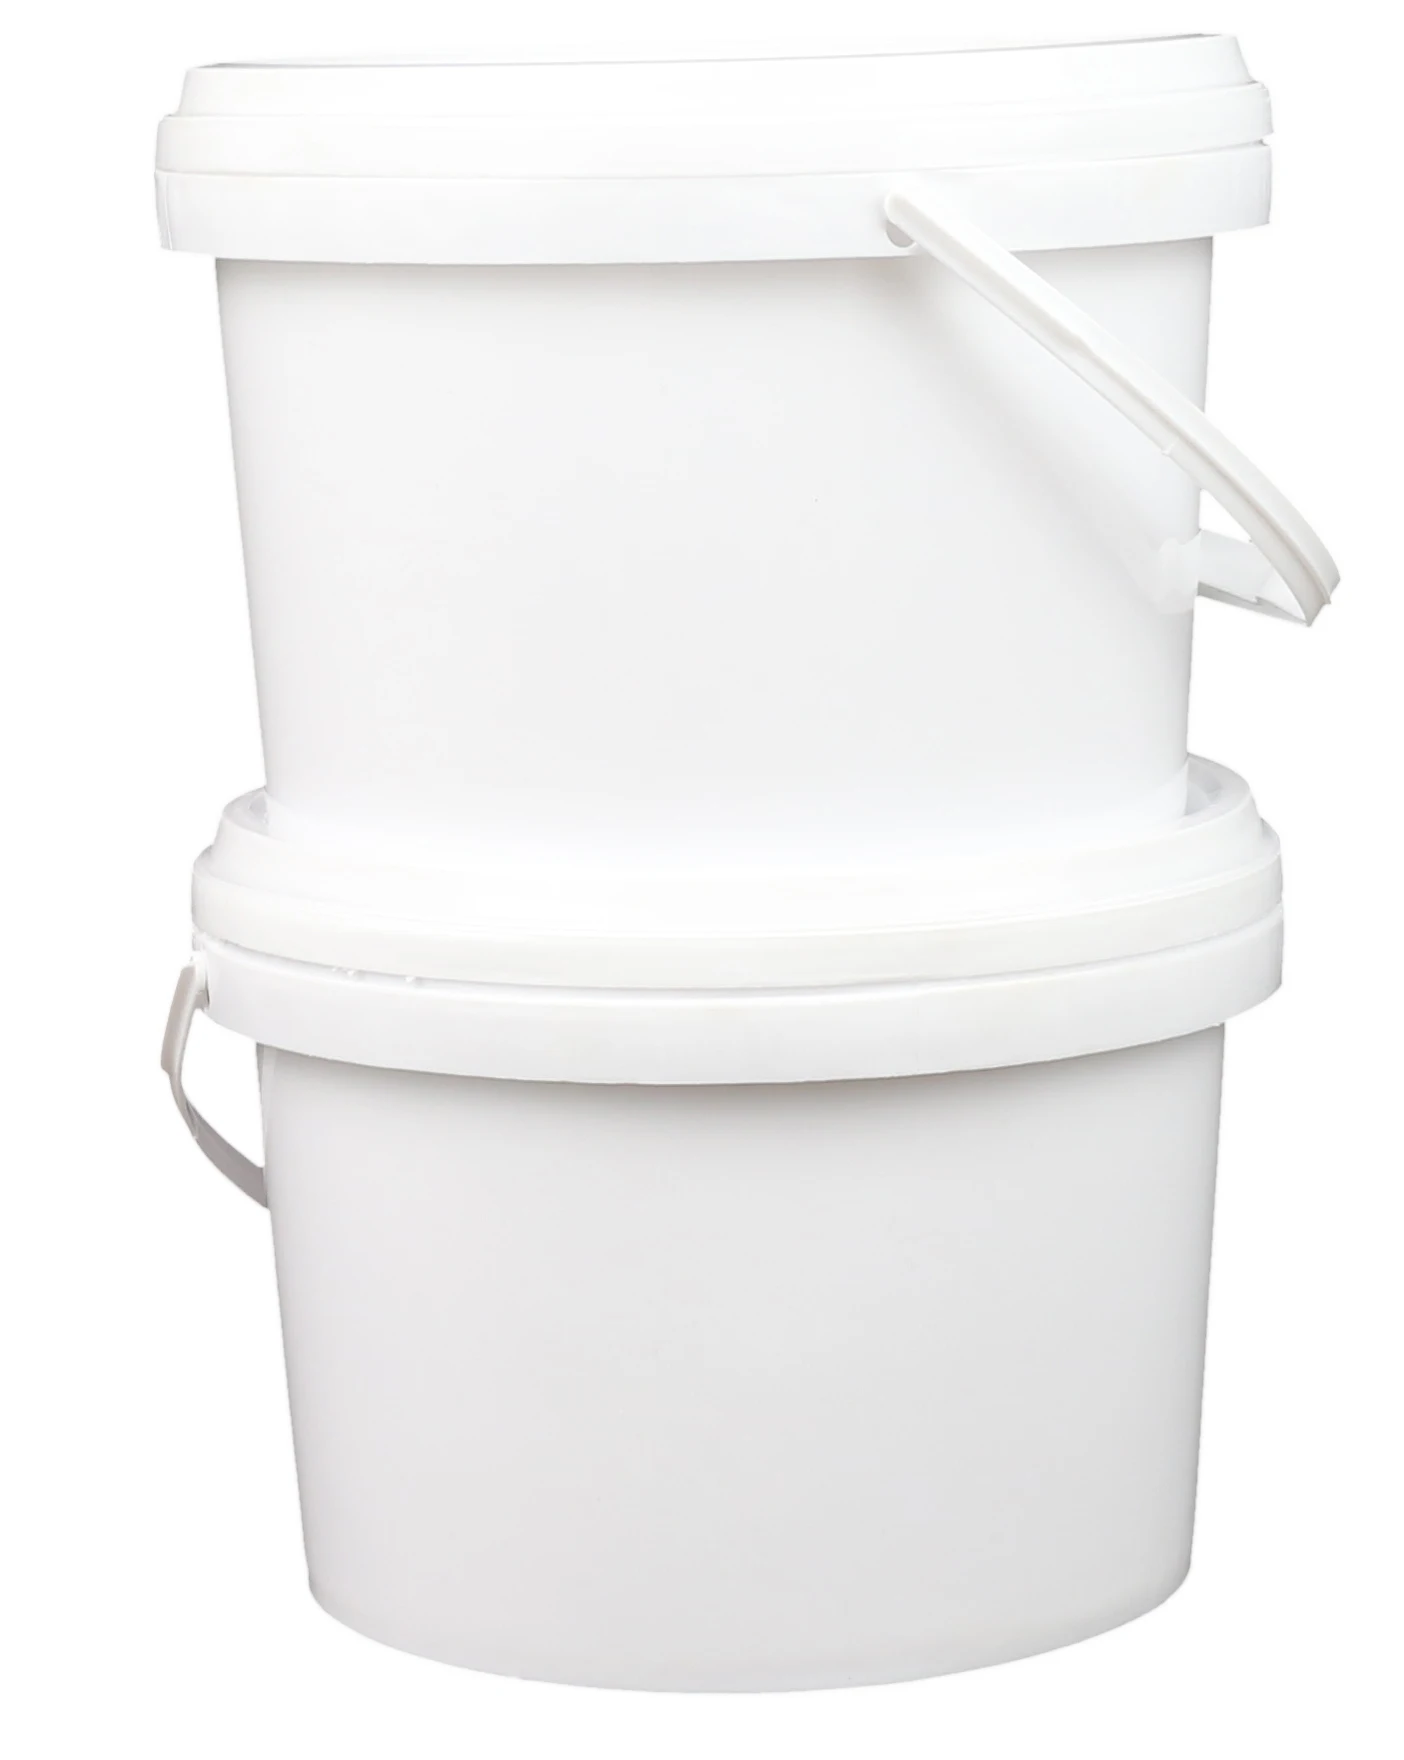 Food Grade Plastic 1 Gallon Containers Buy 1 Gallon Containers